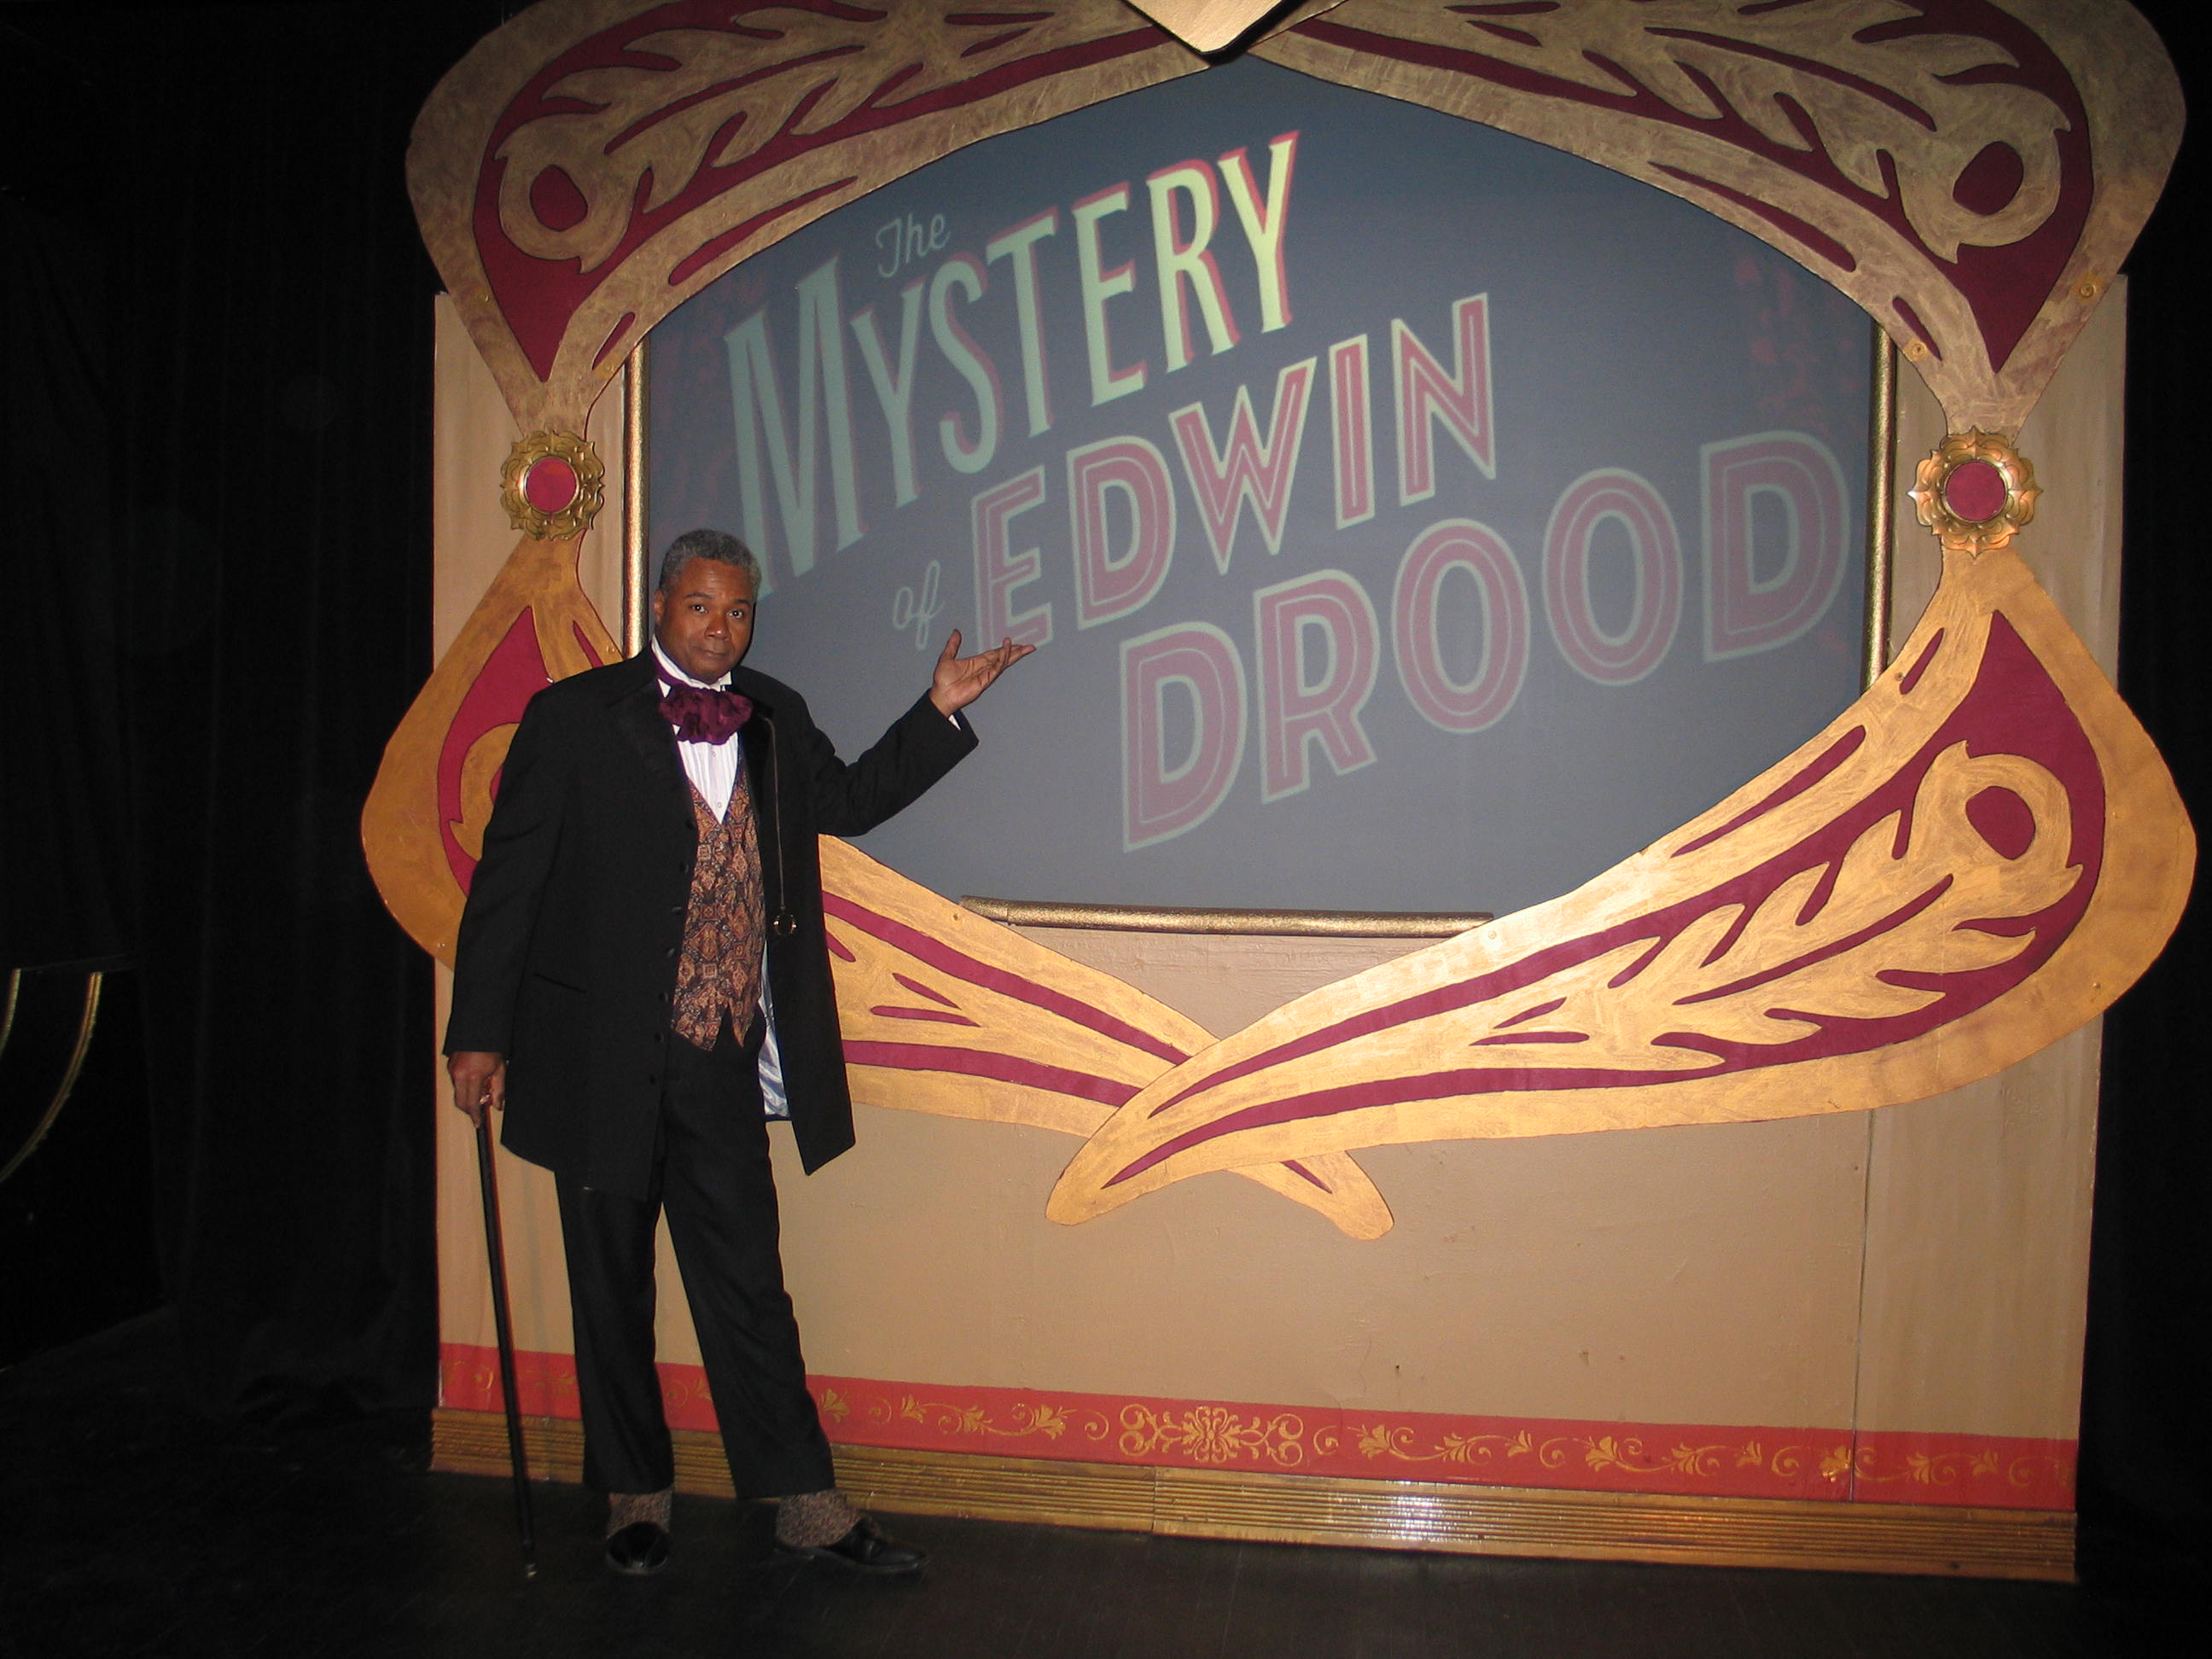 A Notable Dual Role: 2019 Broadwayworld Chicago Award Nominee for Best Performer In A Musical Darryl Maximilian Robinson as The Chairman Mr. William Cartwright/Mayor Thomas Sapsea in Drood.